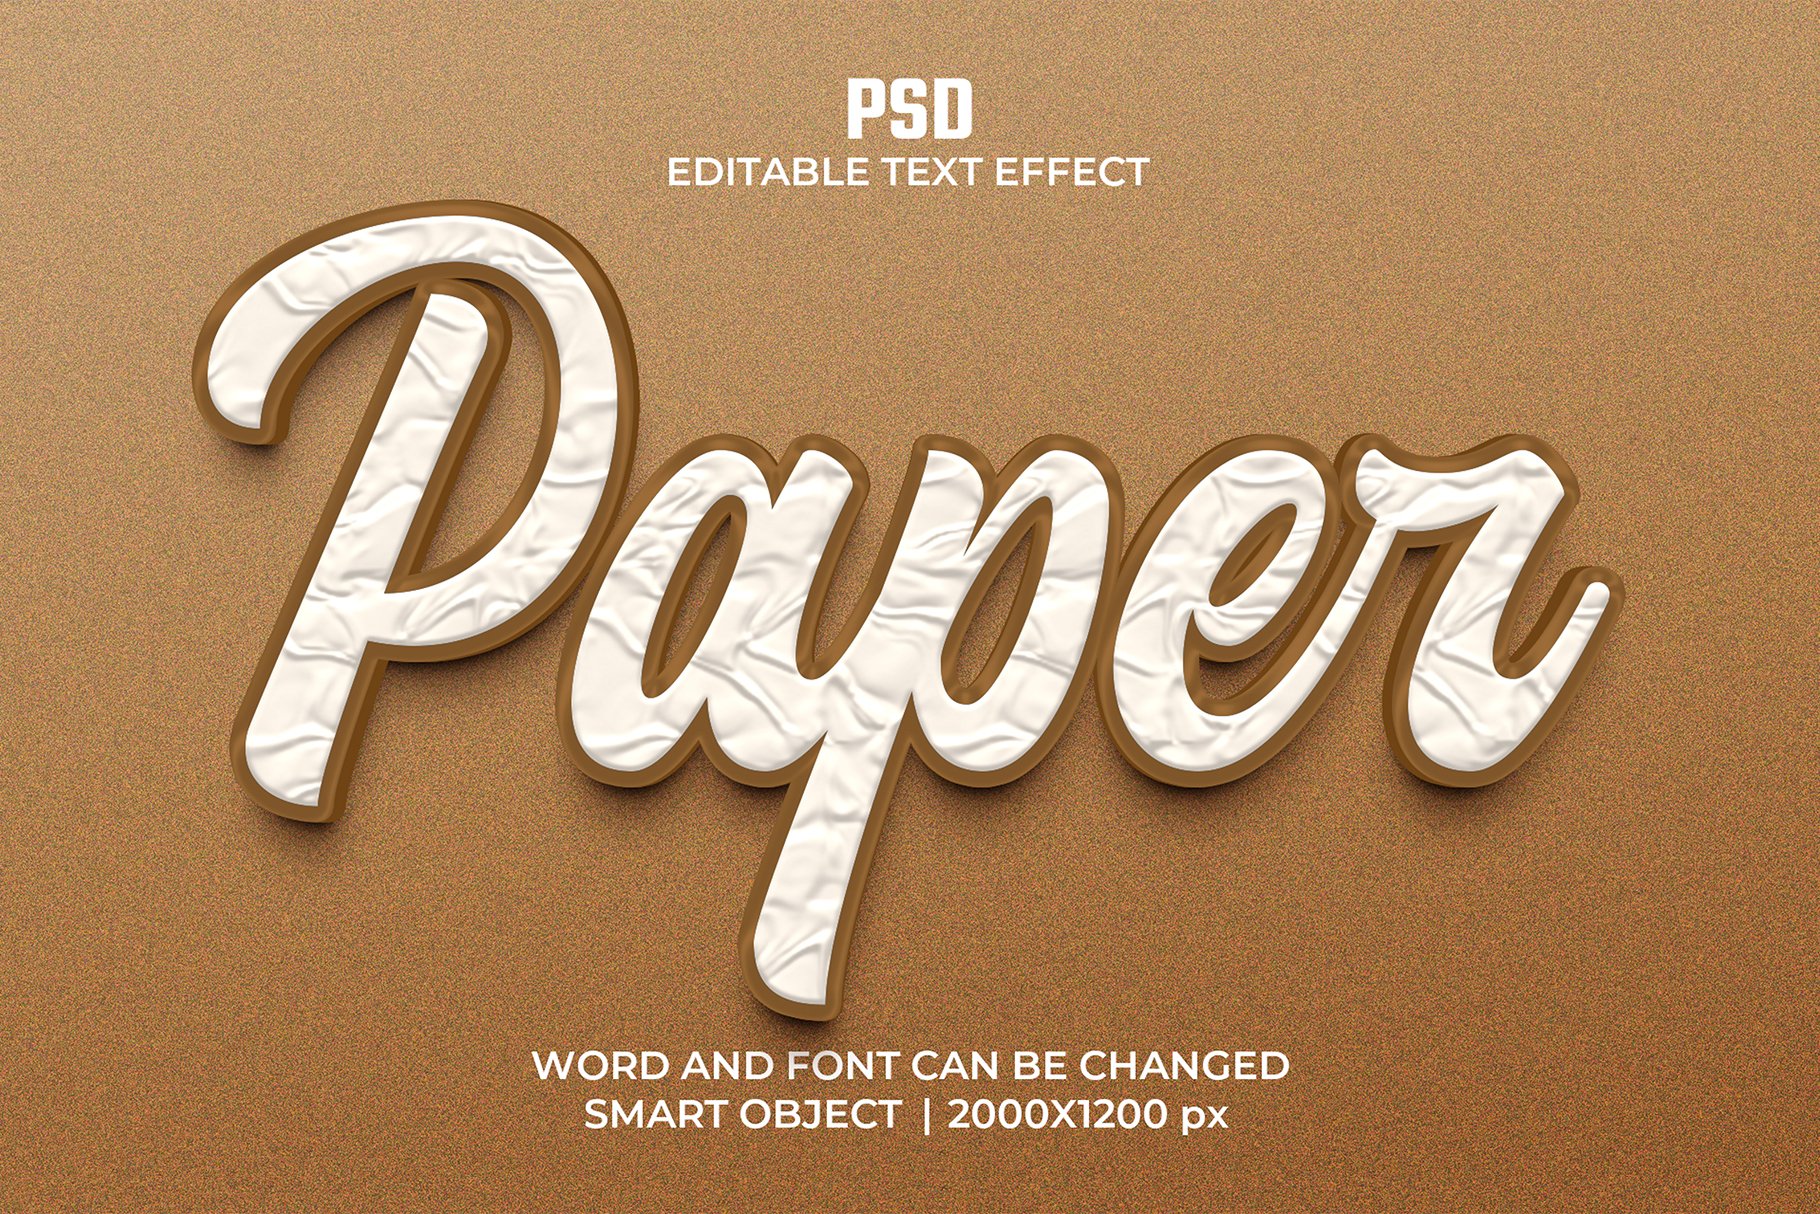 paper 3d Editable Text Effect Stylecover image.